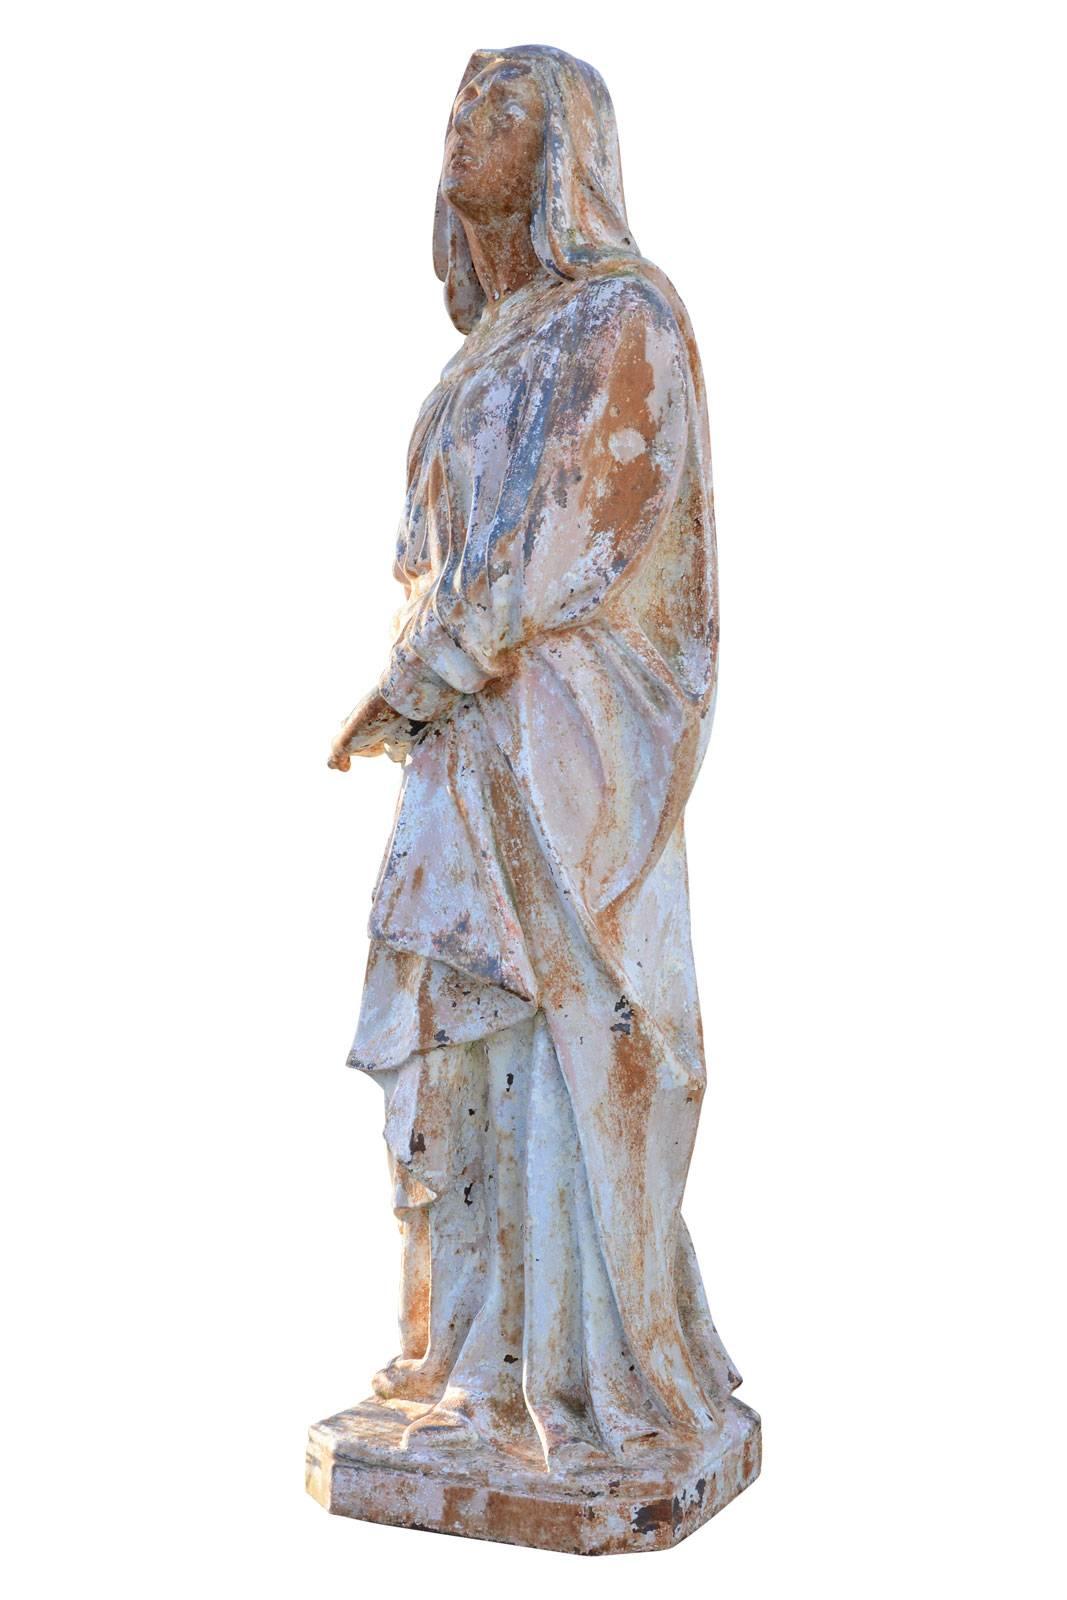 Dated 19th century, cast iron statue of the Virgin Mary in Mater Dolorosa, to be held near a cross. Traces of polychromy. Origin: Ancient Dominican nuns' park of the chapel of Corme Ecluse (17). Presented with the E6681 pedestal.